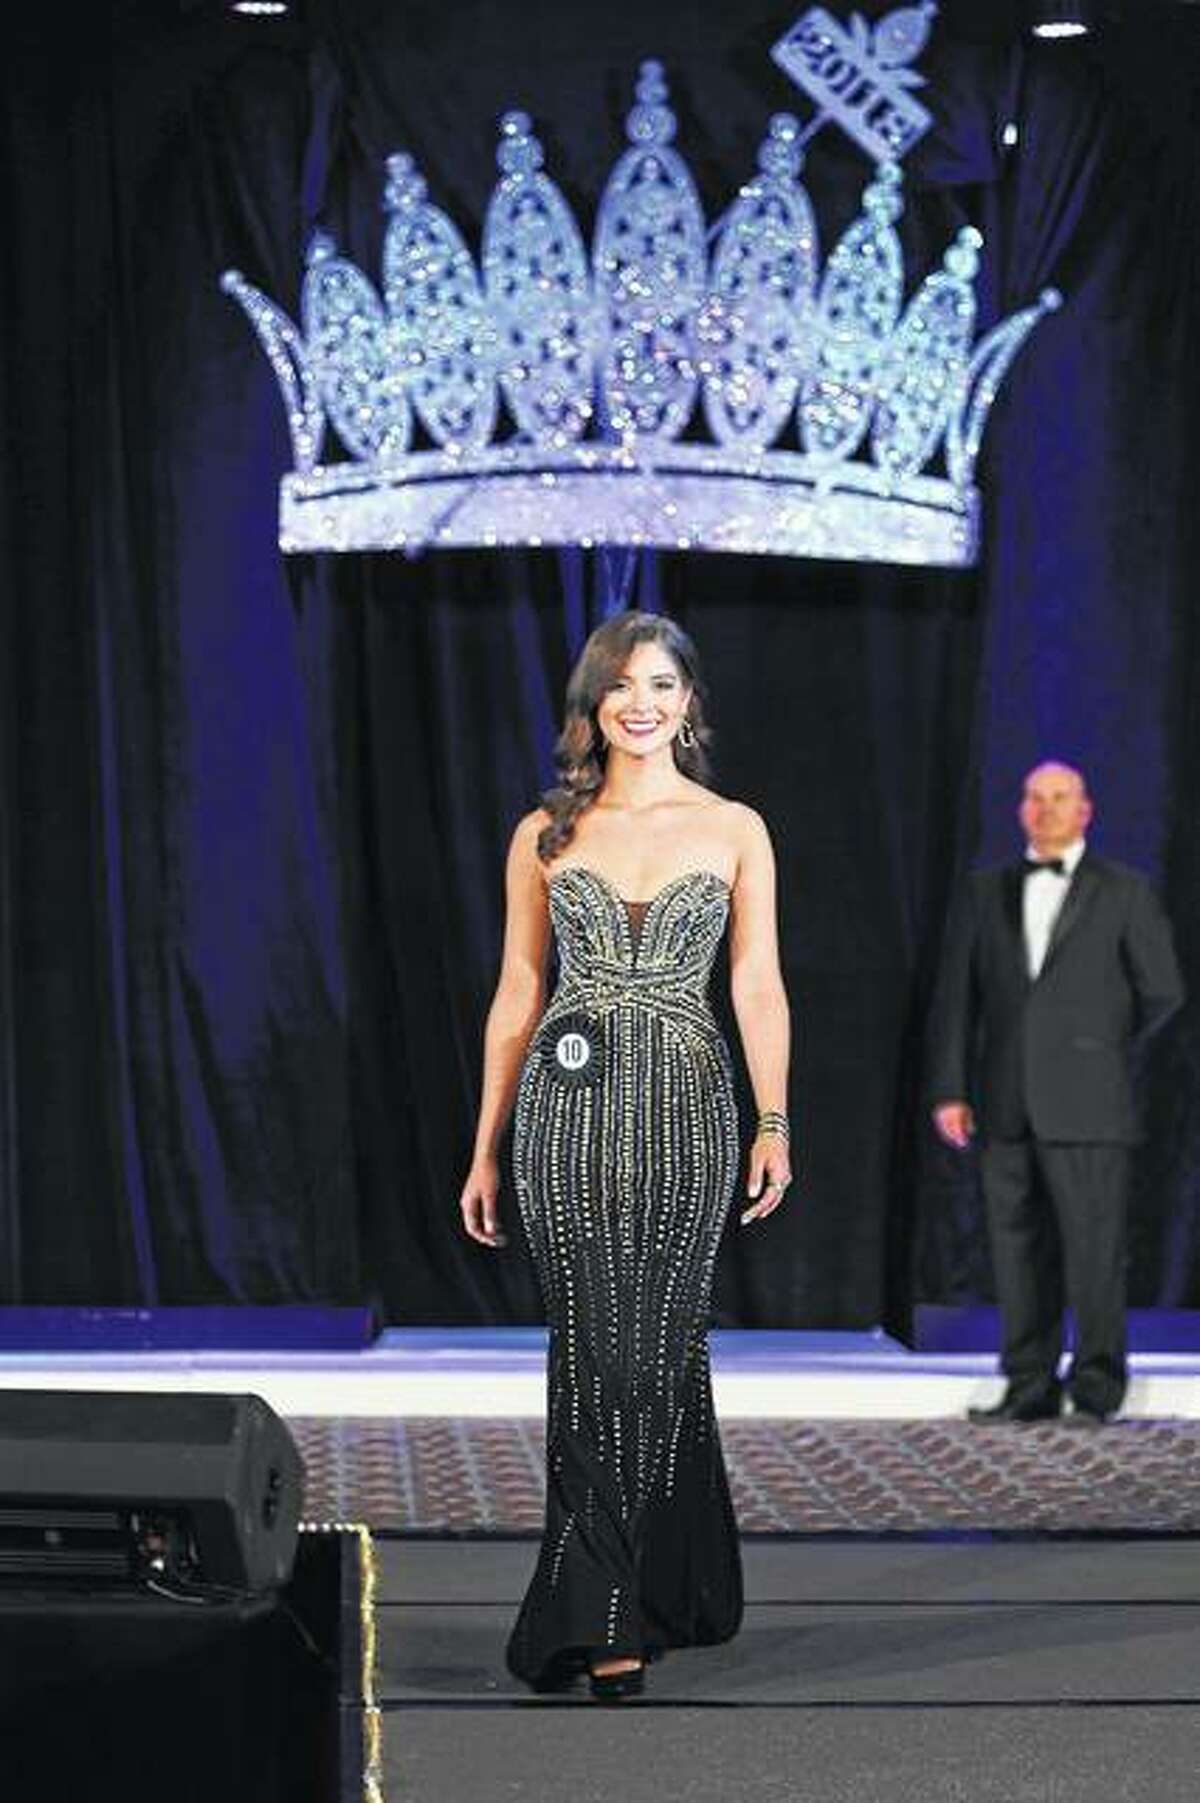 Miss Western Illinois Fair Danielle Rondeau, 19, of Jacksonville takes part in the pageant’s evening gown competition.